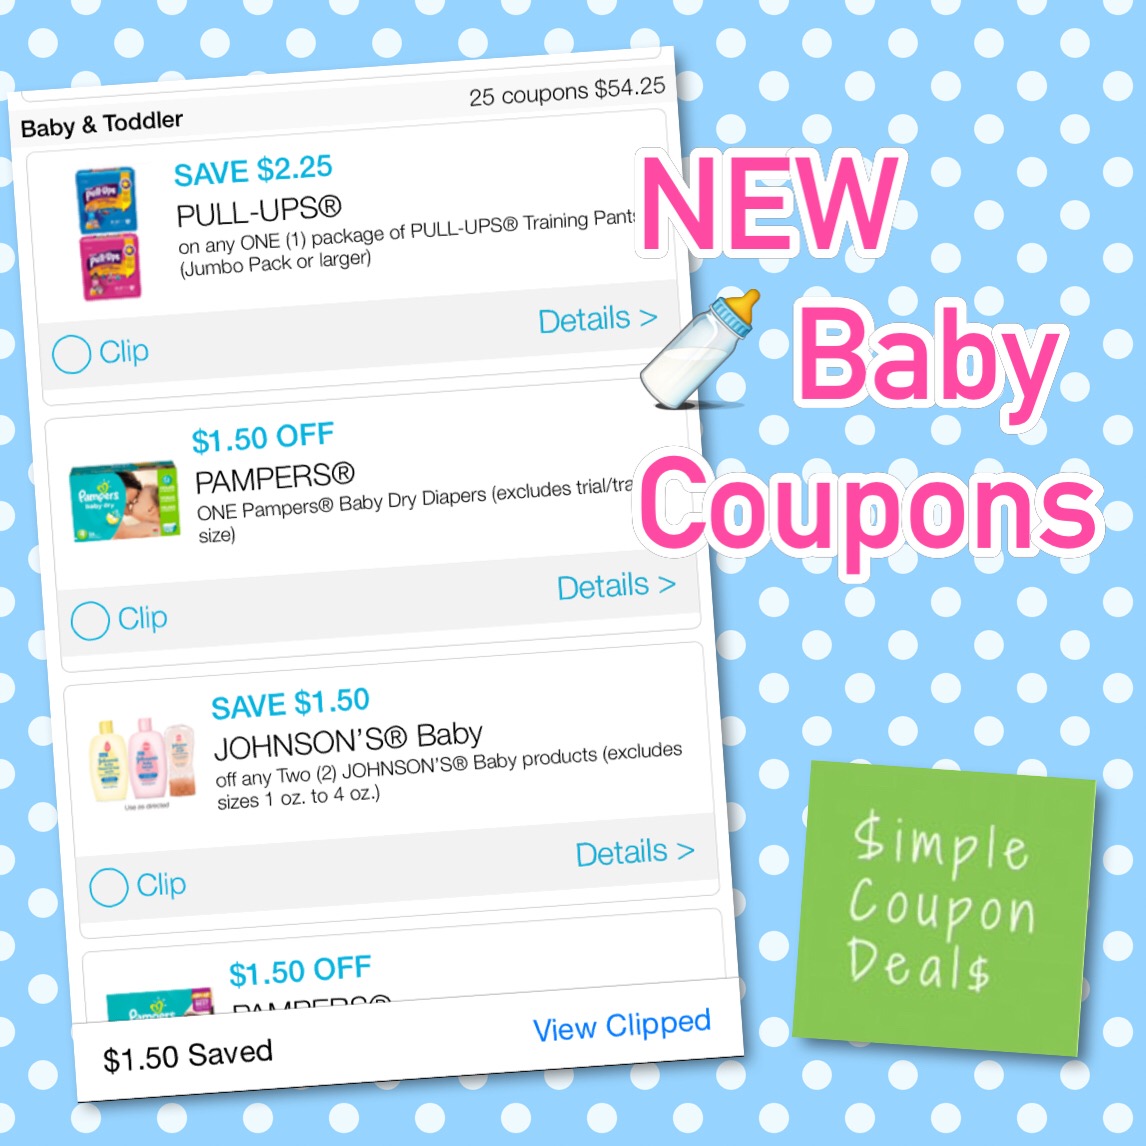 new-printable-baby-coupons-and-more-simple-coupon-deals